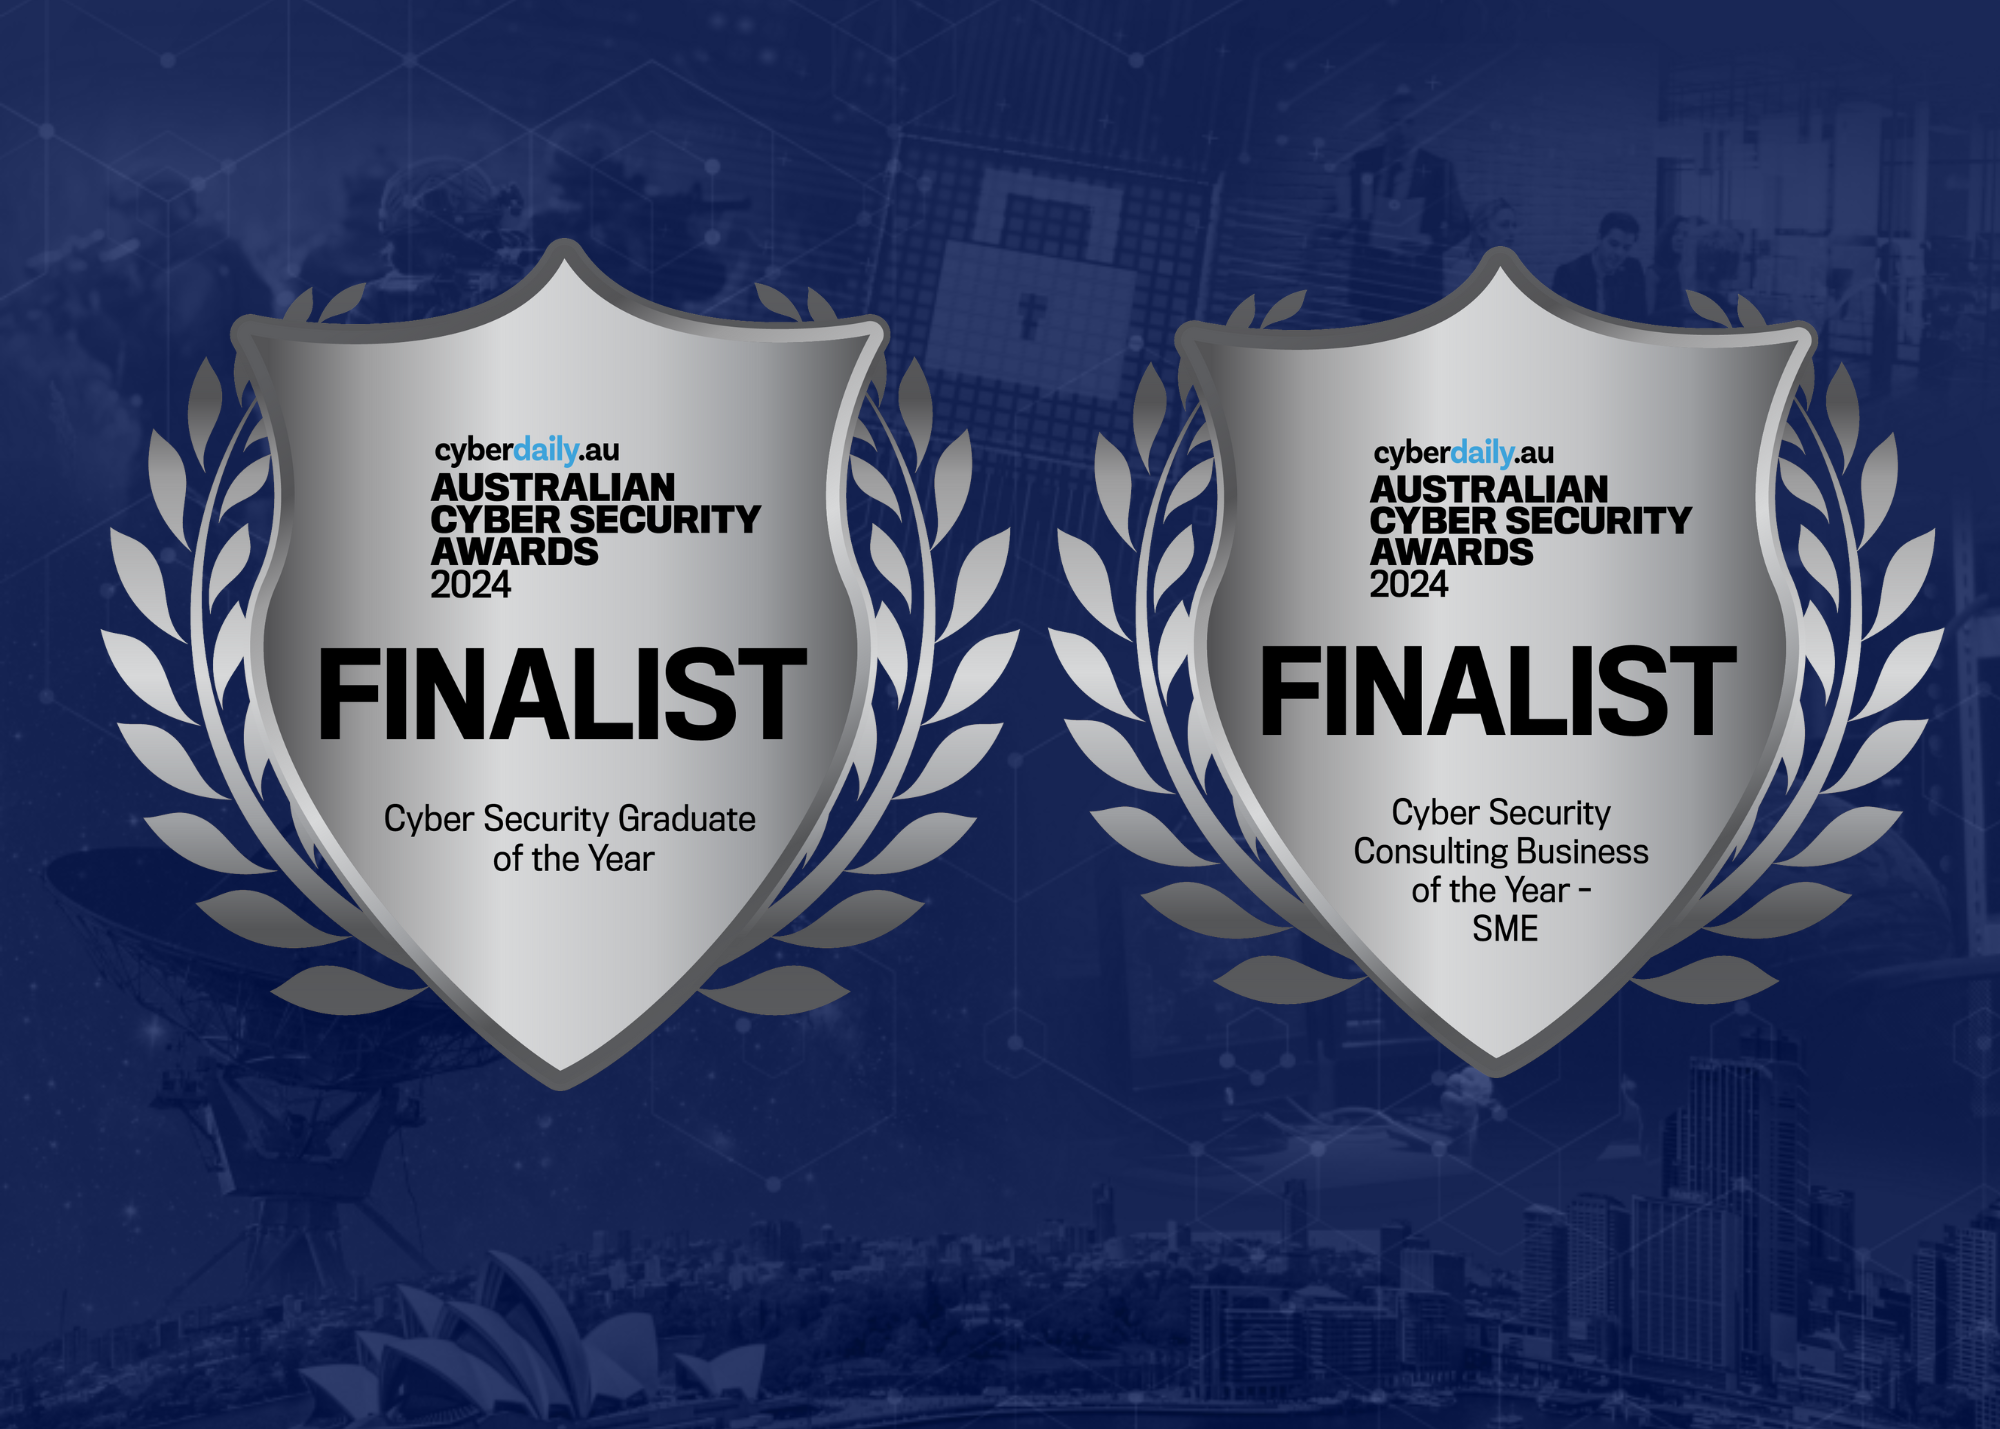 Bluerydge is Finalist at the 2024 Australian Cyber Security Awards